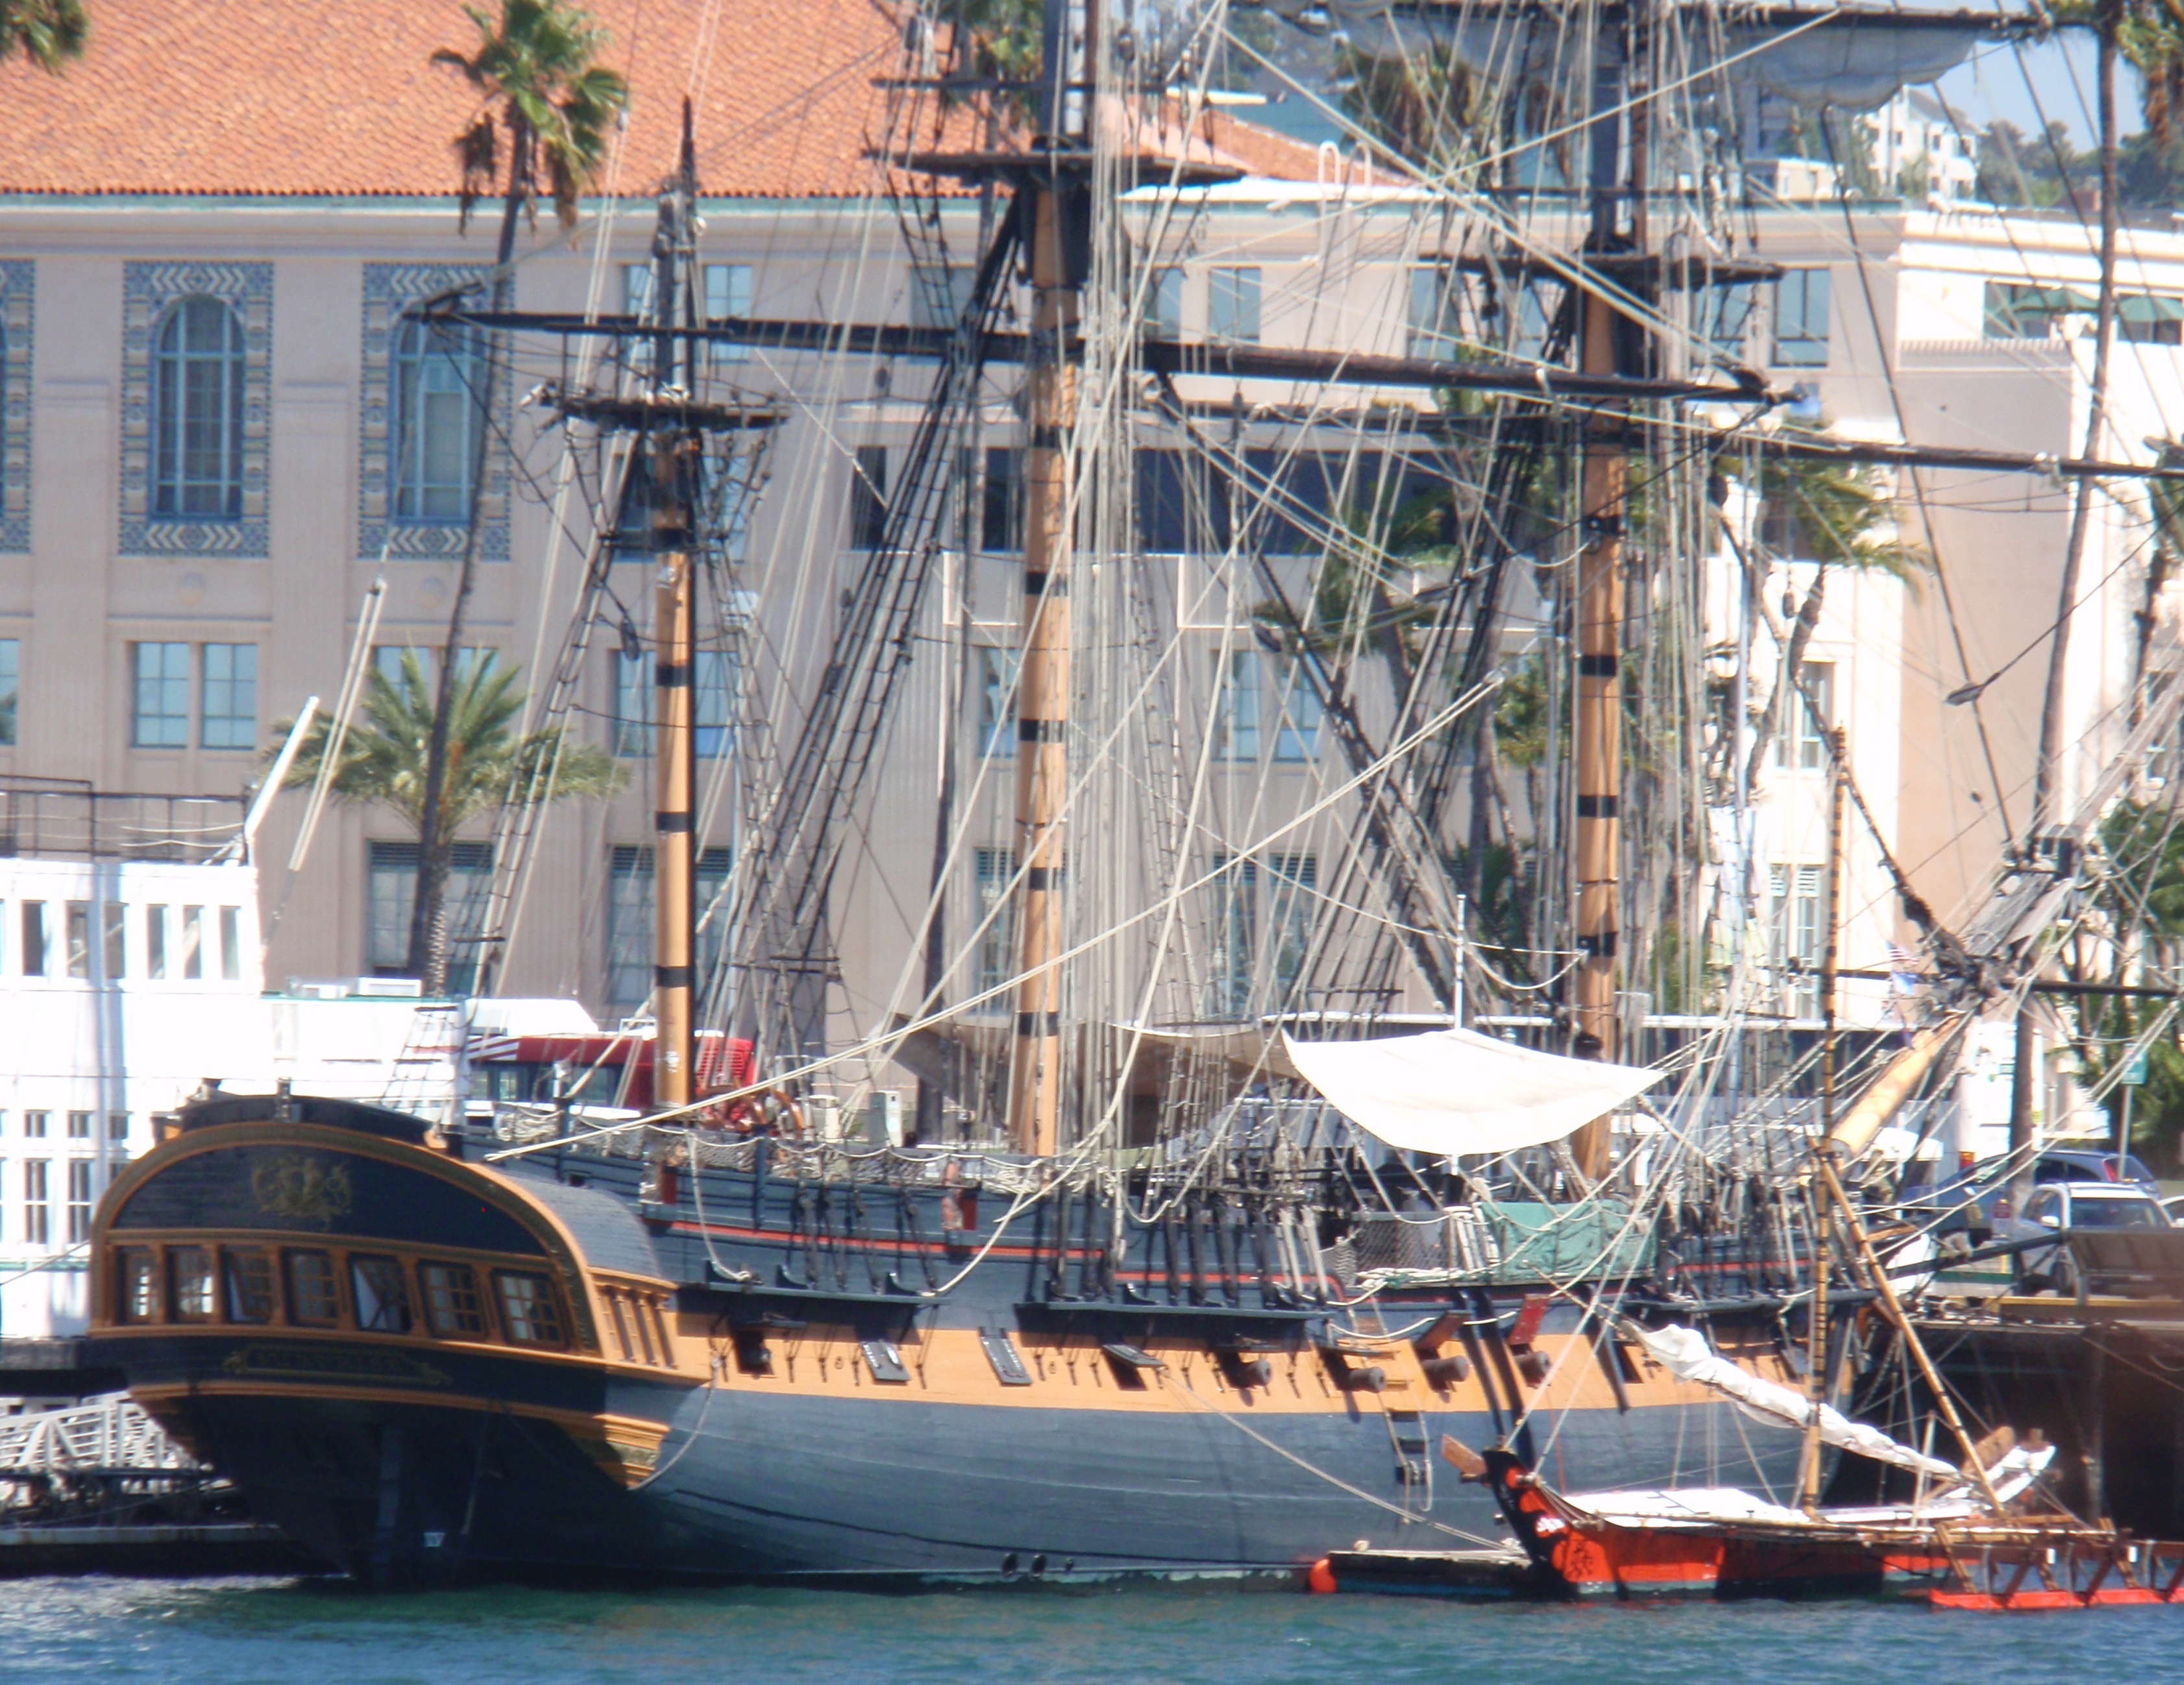 Replica of a state-of-the-art warship in the 1800s. That is how you could get across the ocean quickly back then. Photo of San Diego Maritime Museum by James Ulvog.